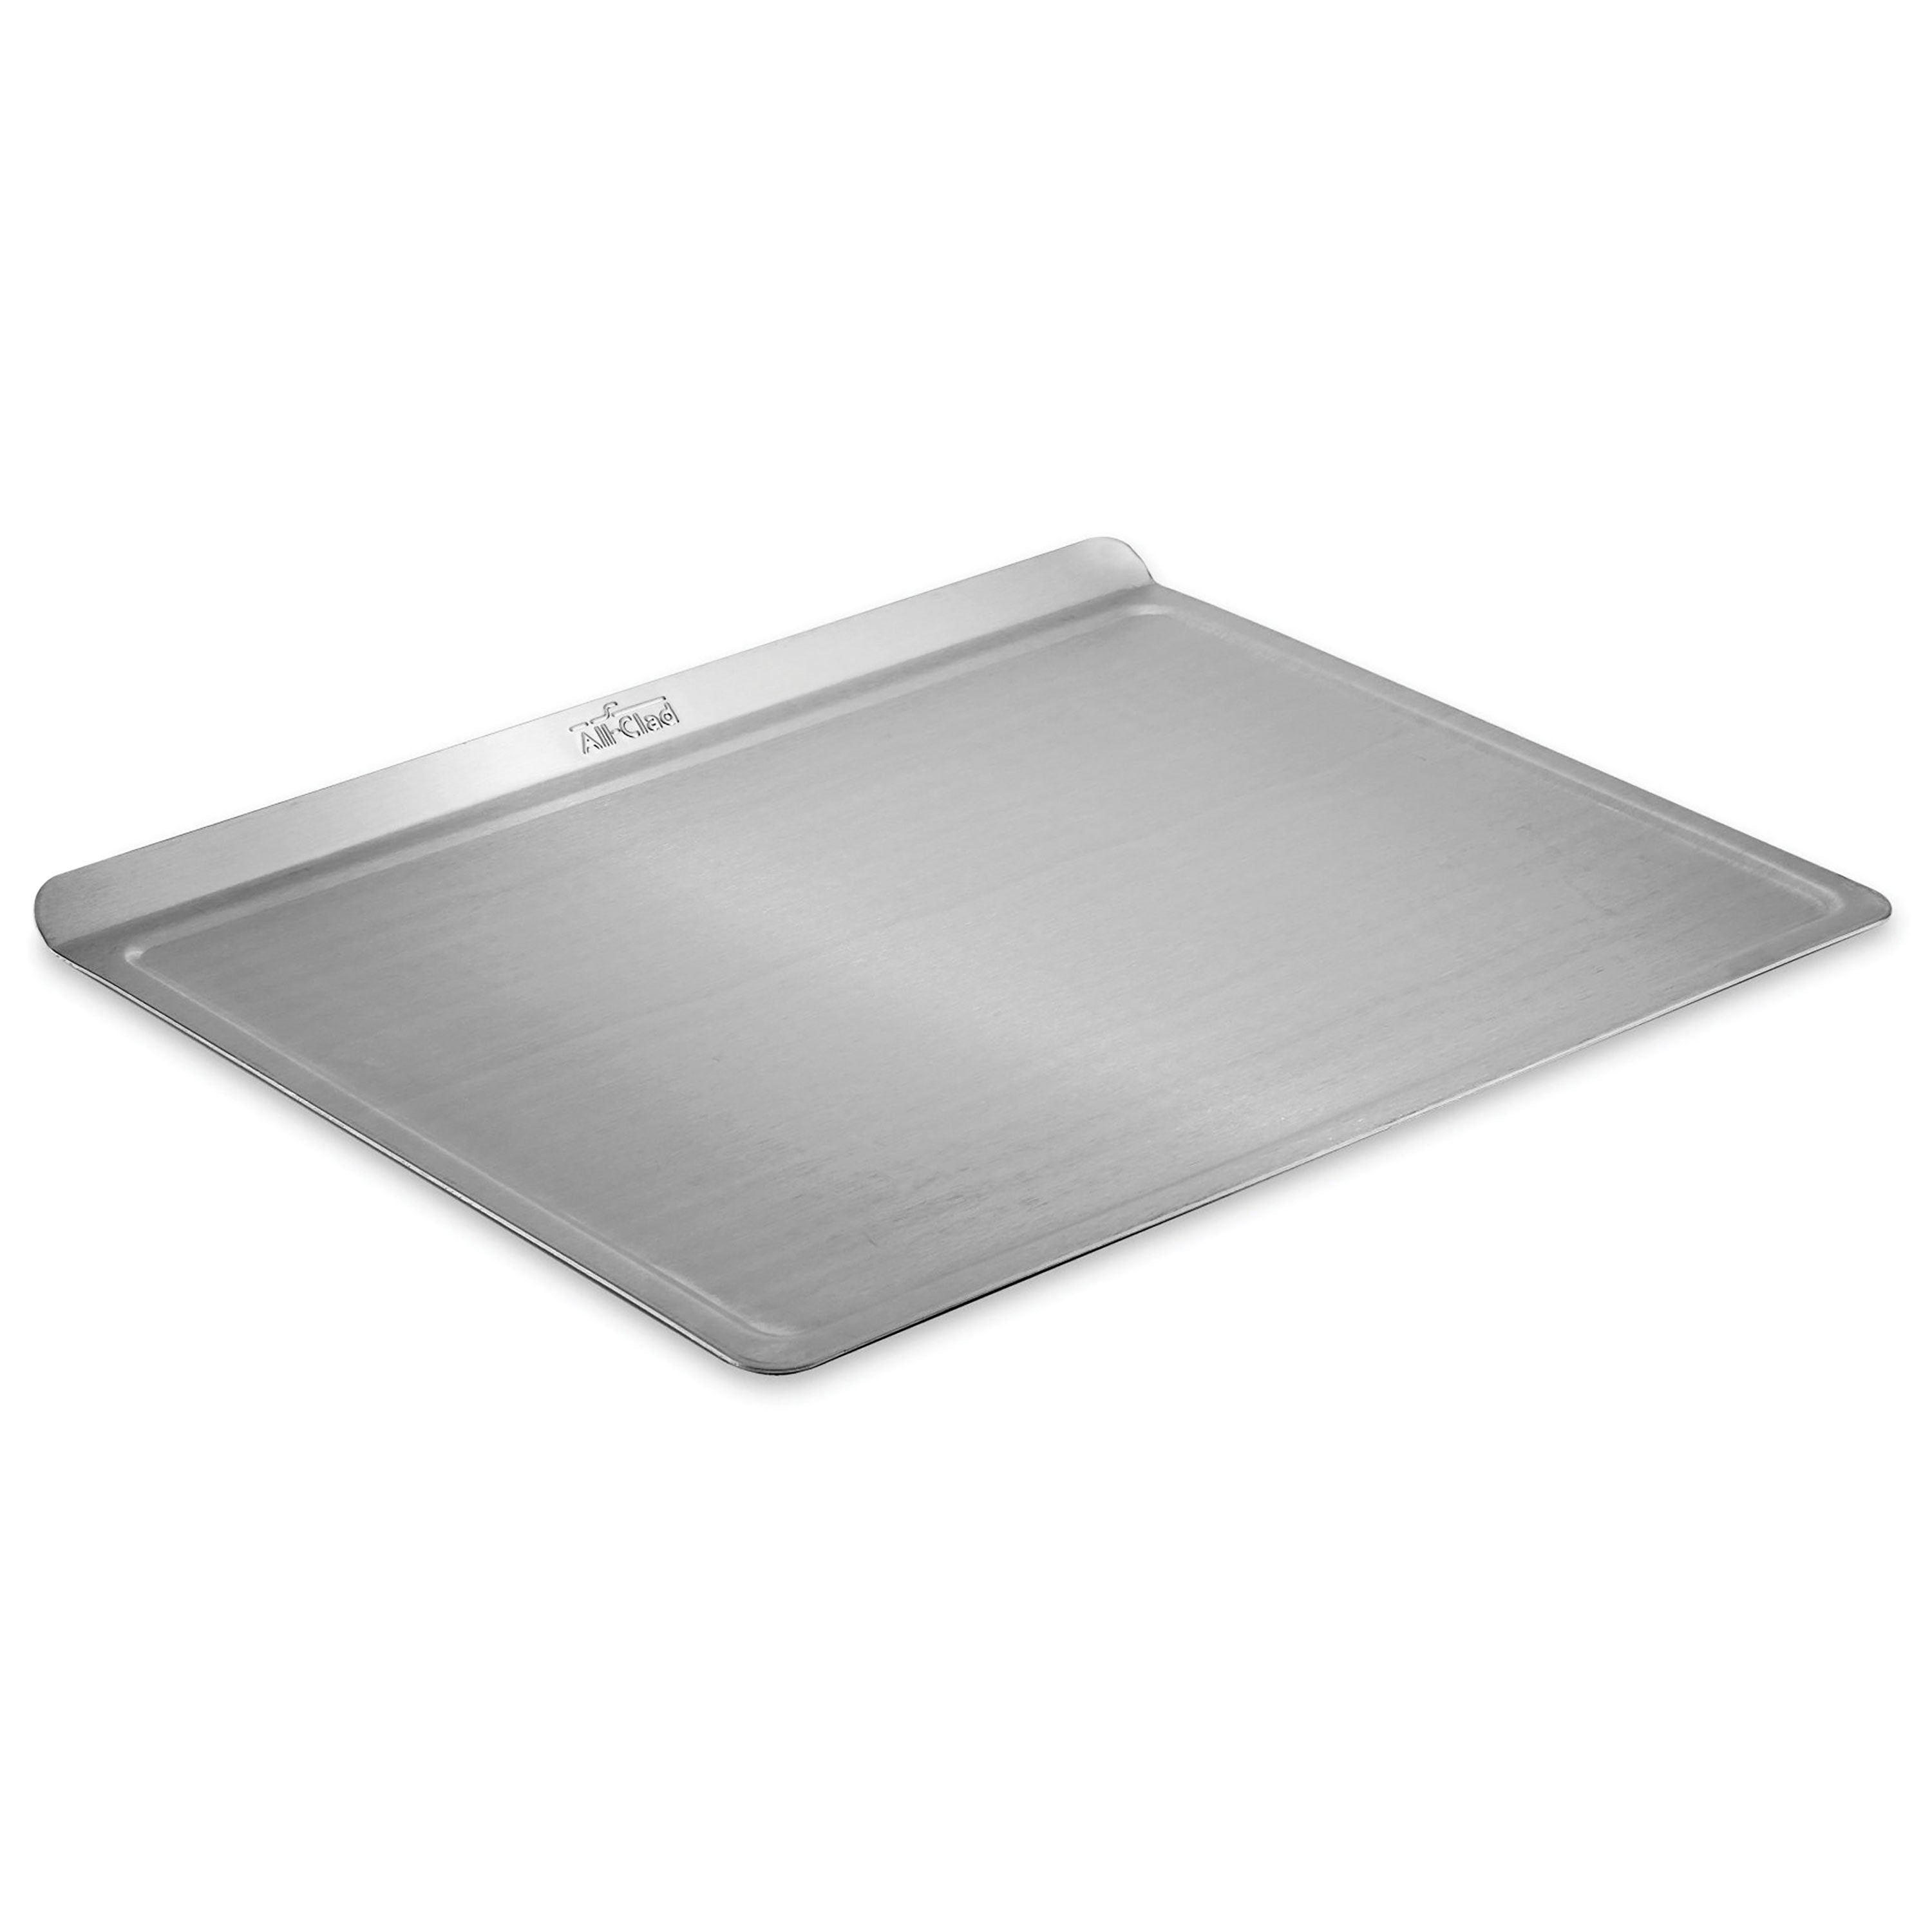 10-Inch x 14-Inch D3 Stainless Steel Roasting Sheet I All-Clad